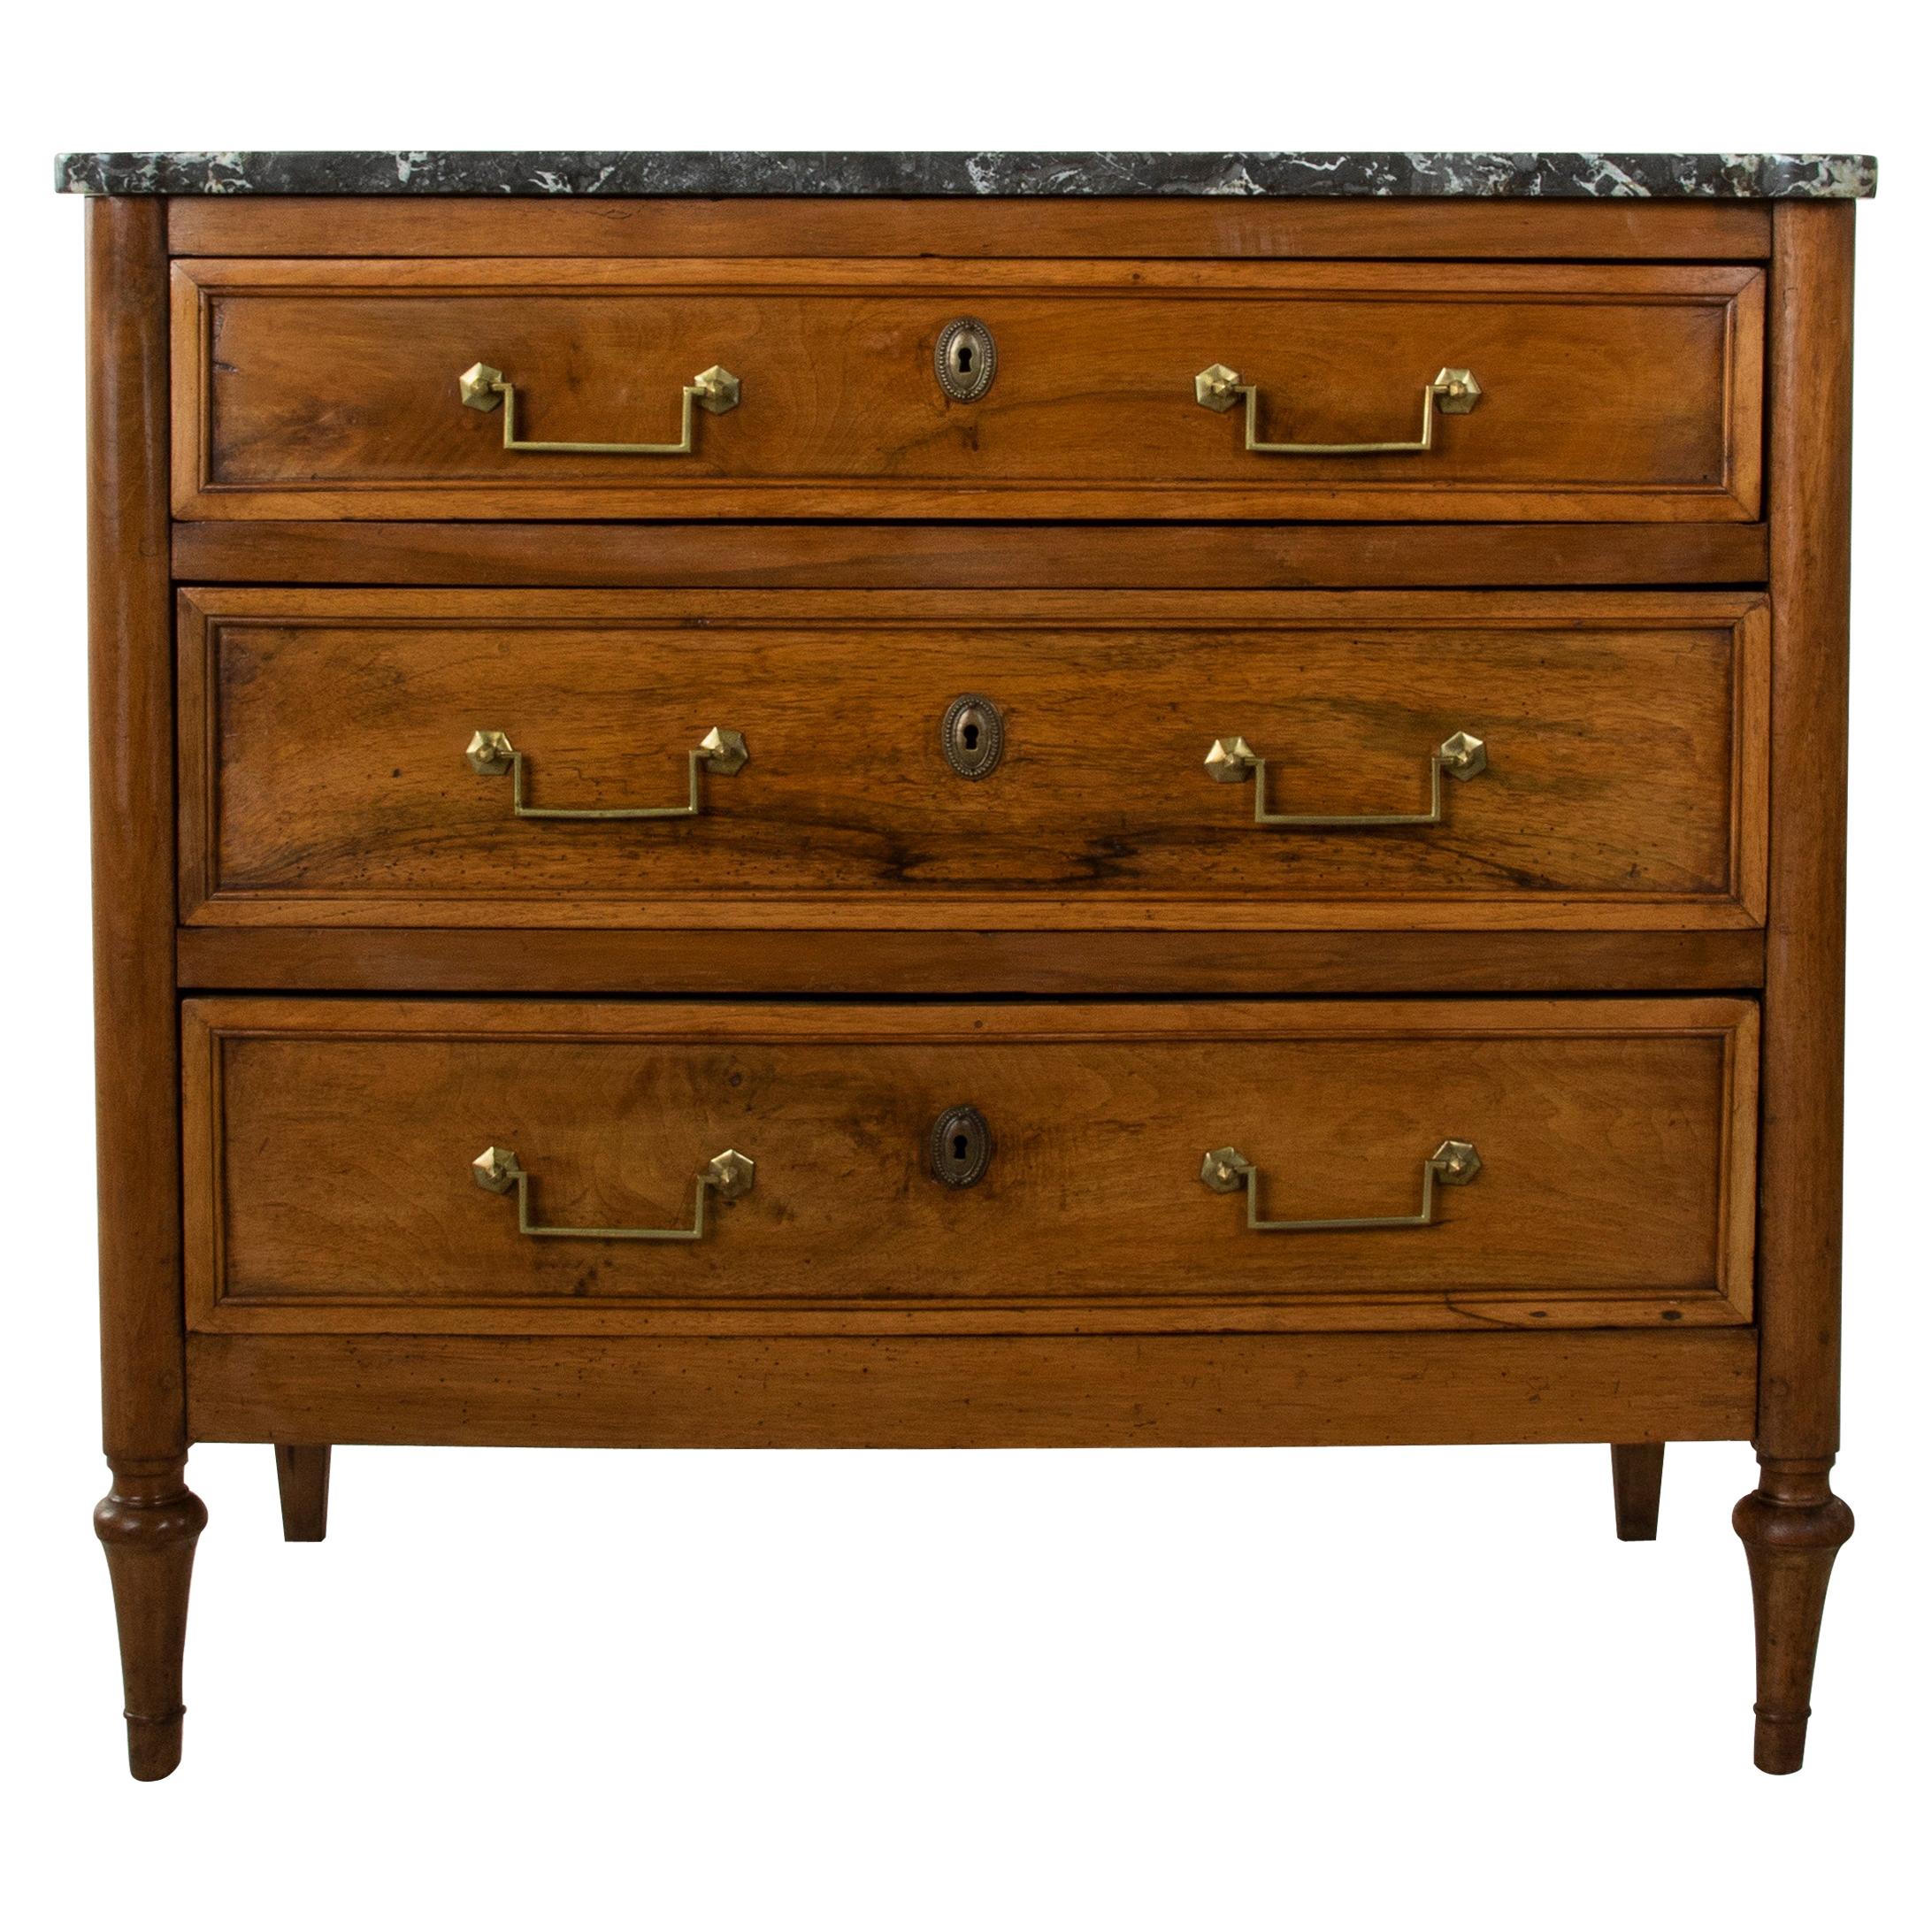 Late 18th Century French Louis XVI Period Walnut Commode or Chest with Marble